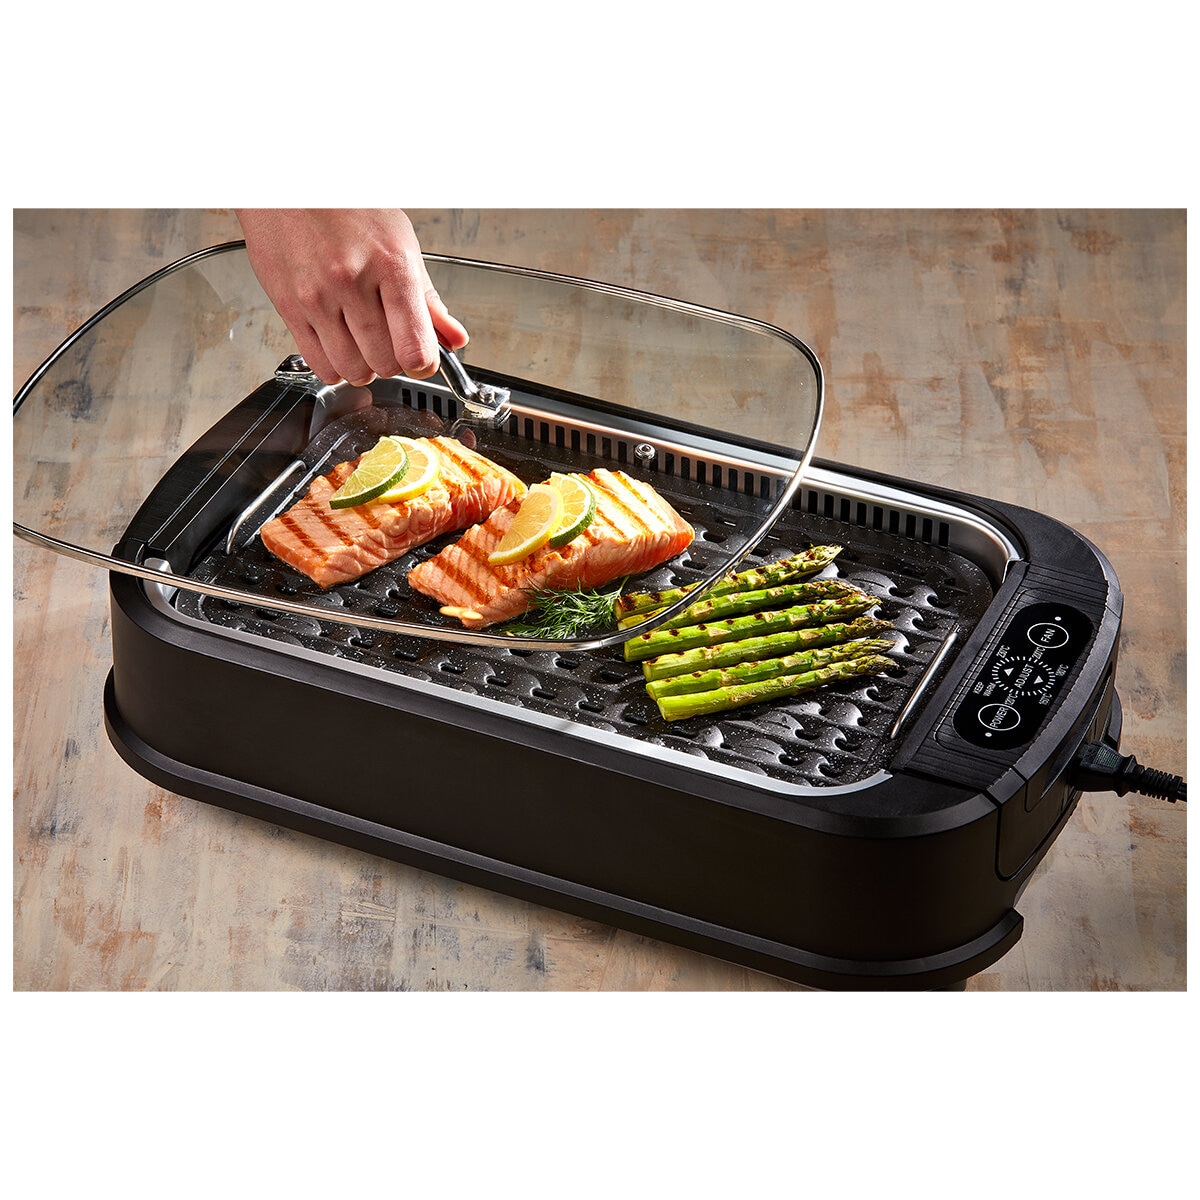 Tristar As Seen On Tv Power Xl Smokeless Grill Pro, Red, Indoor Grills &  Griddles, Furniture & Appliances